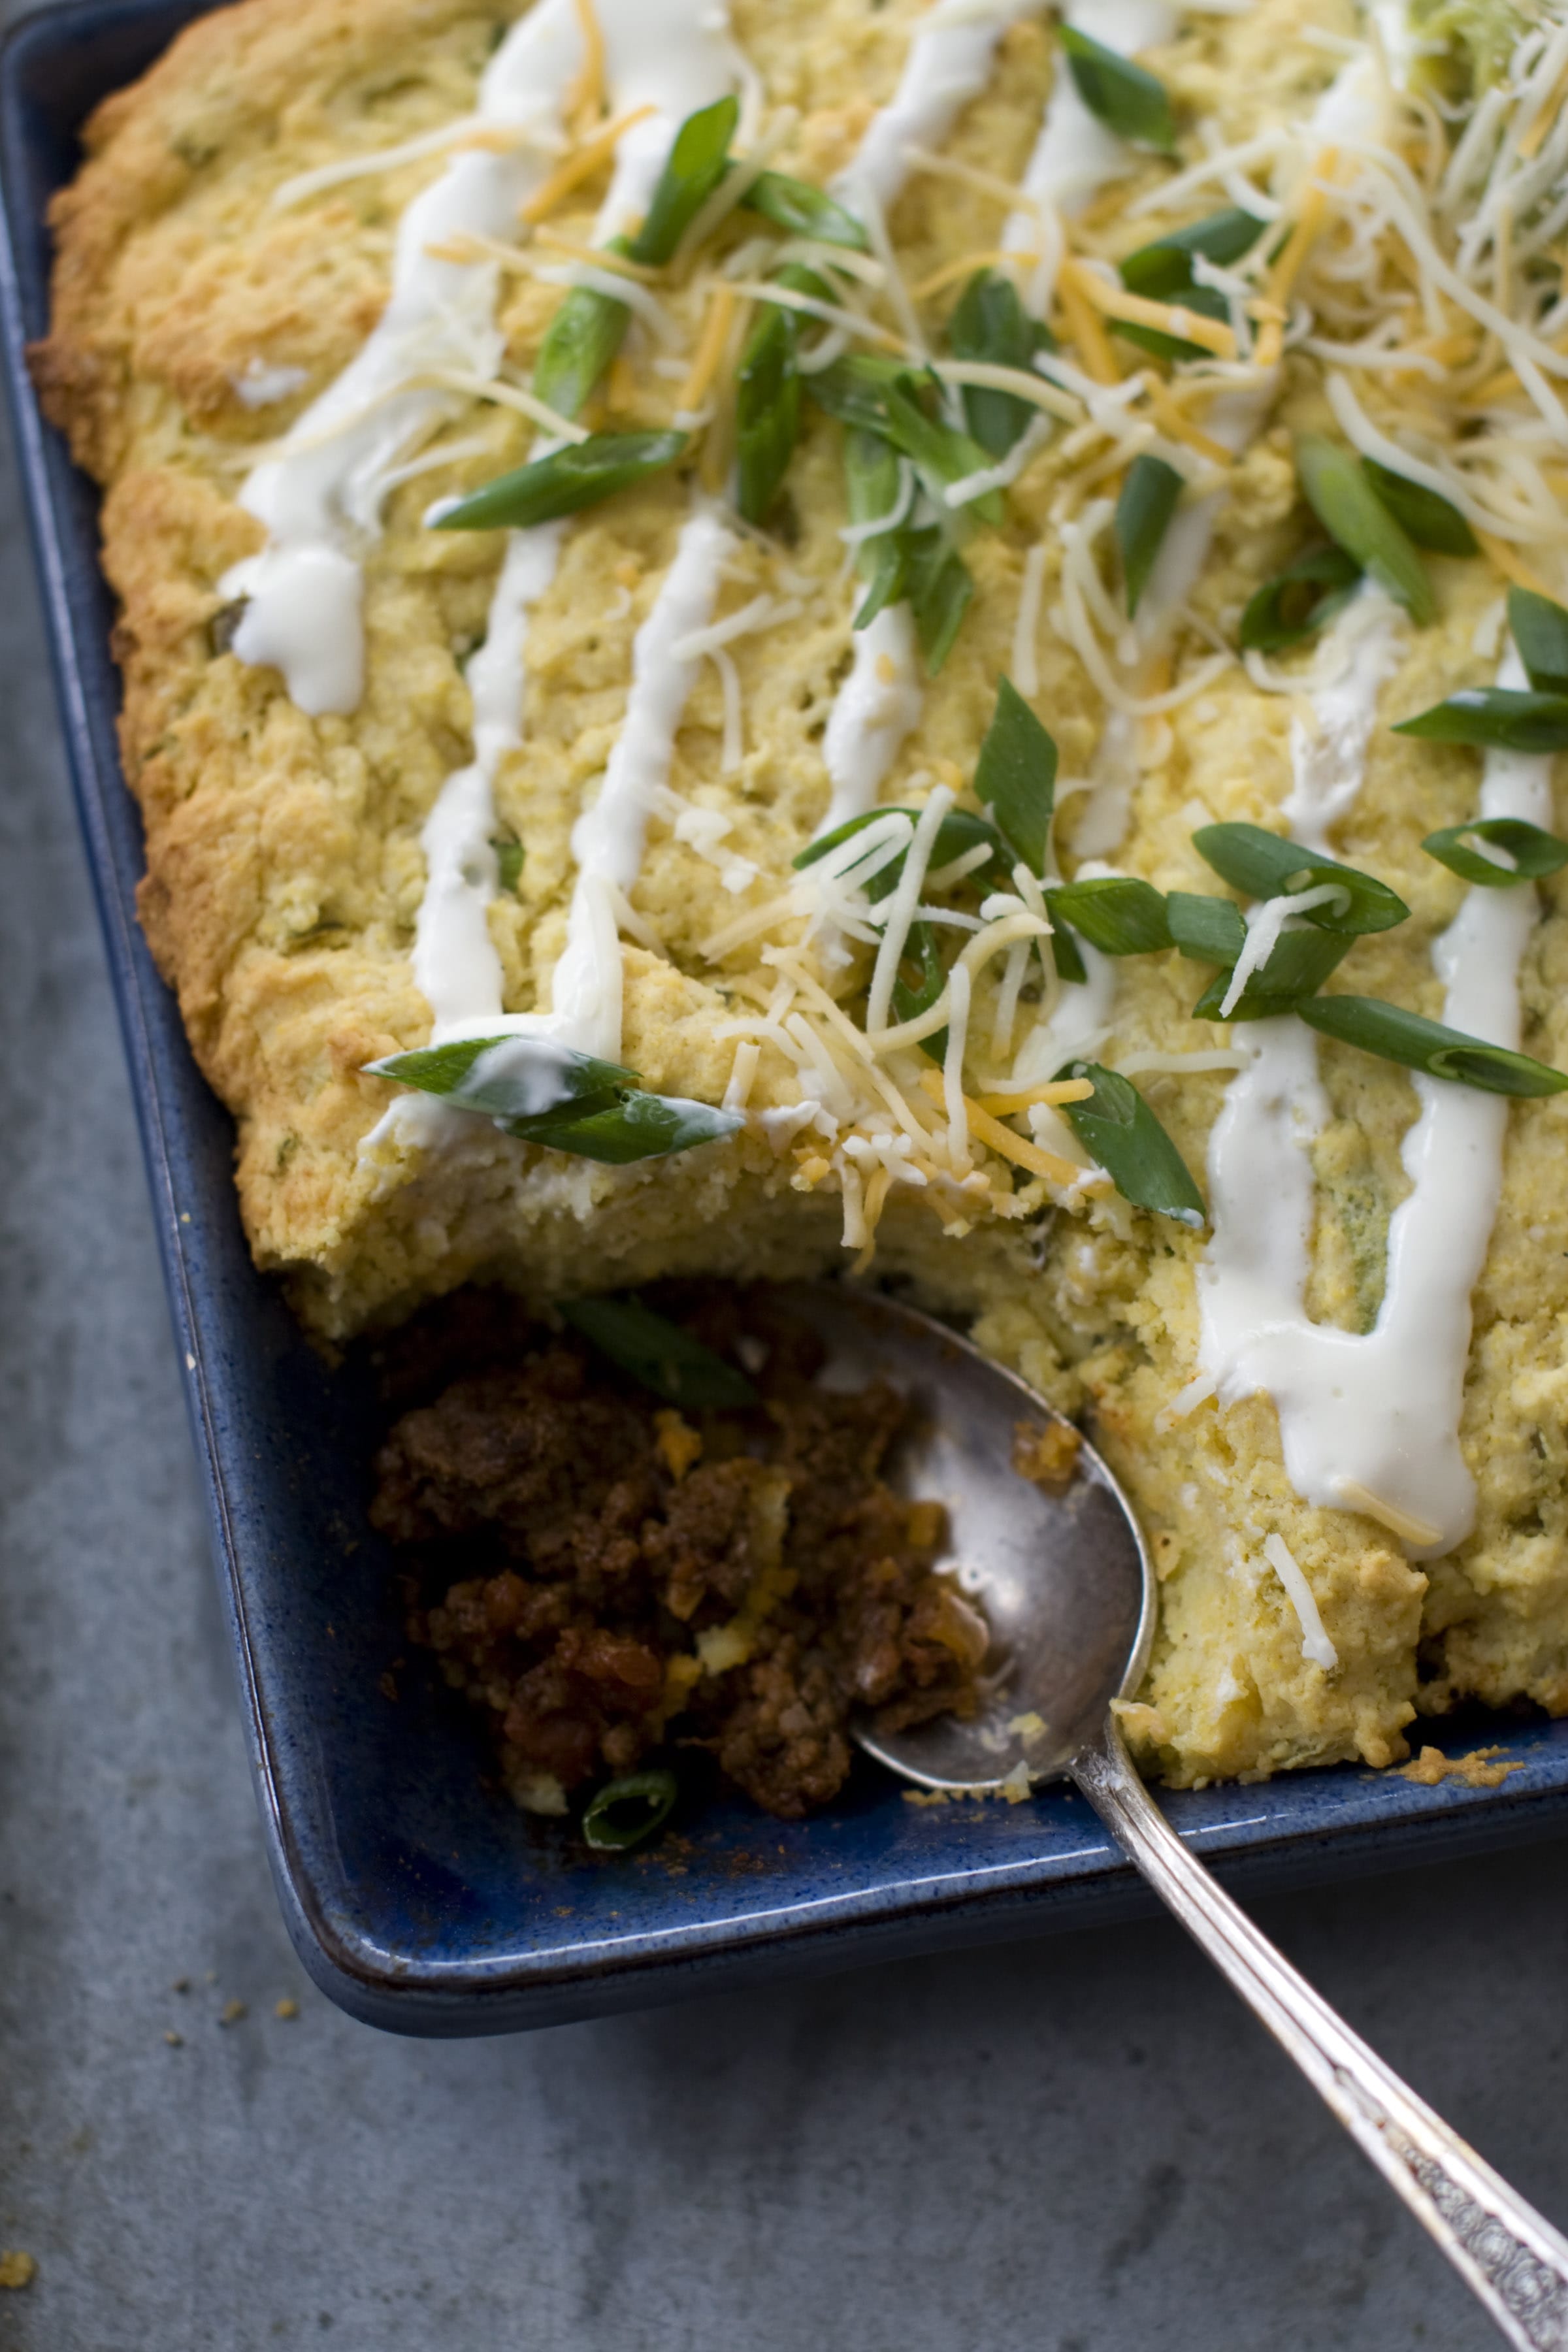 Inspiration for this Chili Cornbread Pie comes from shepherd's pie and a Tex-Mex taco.